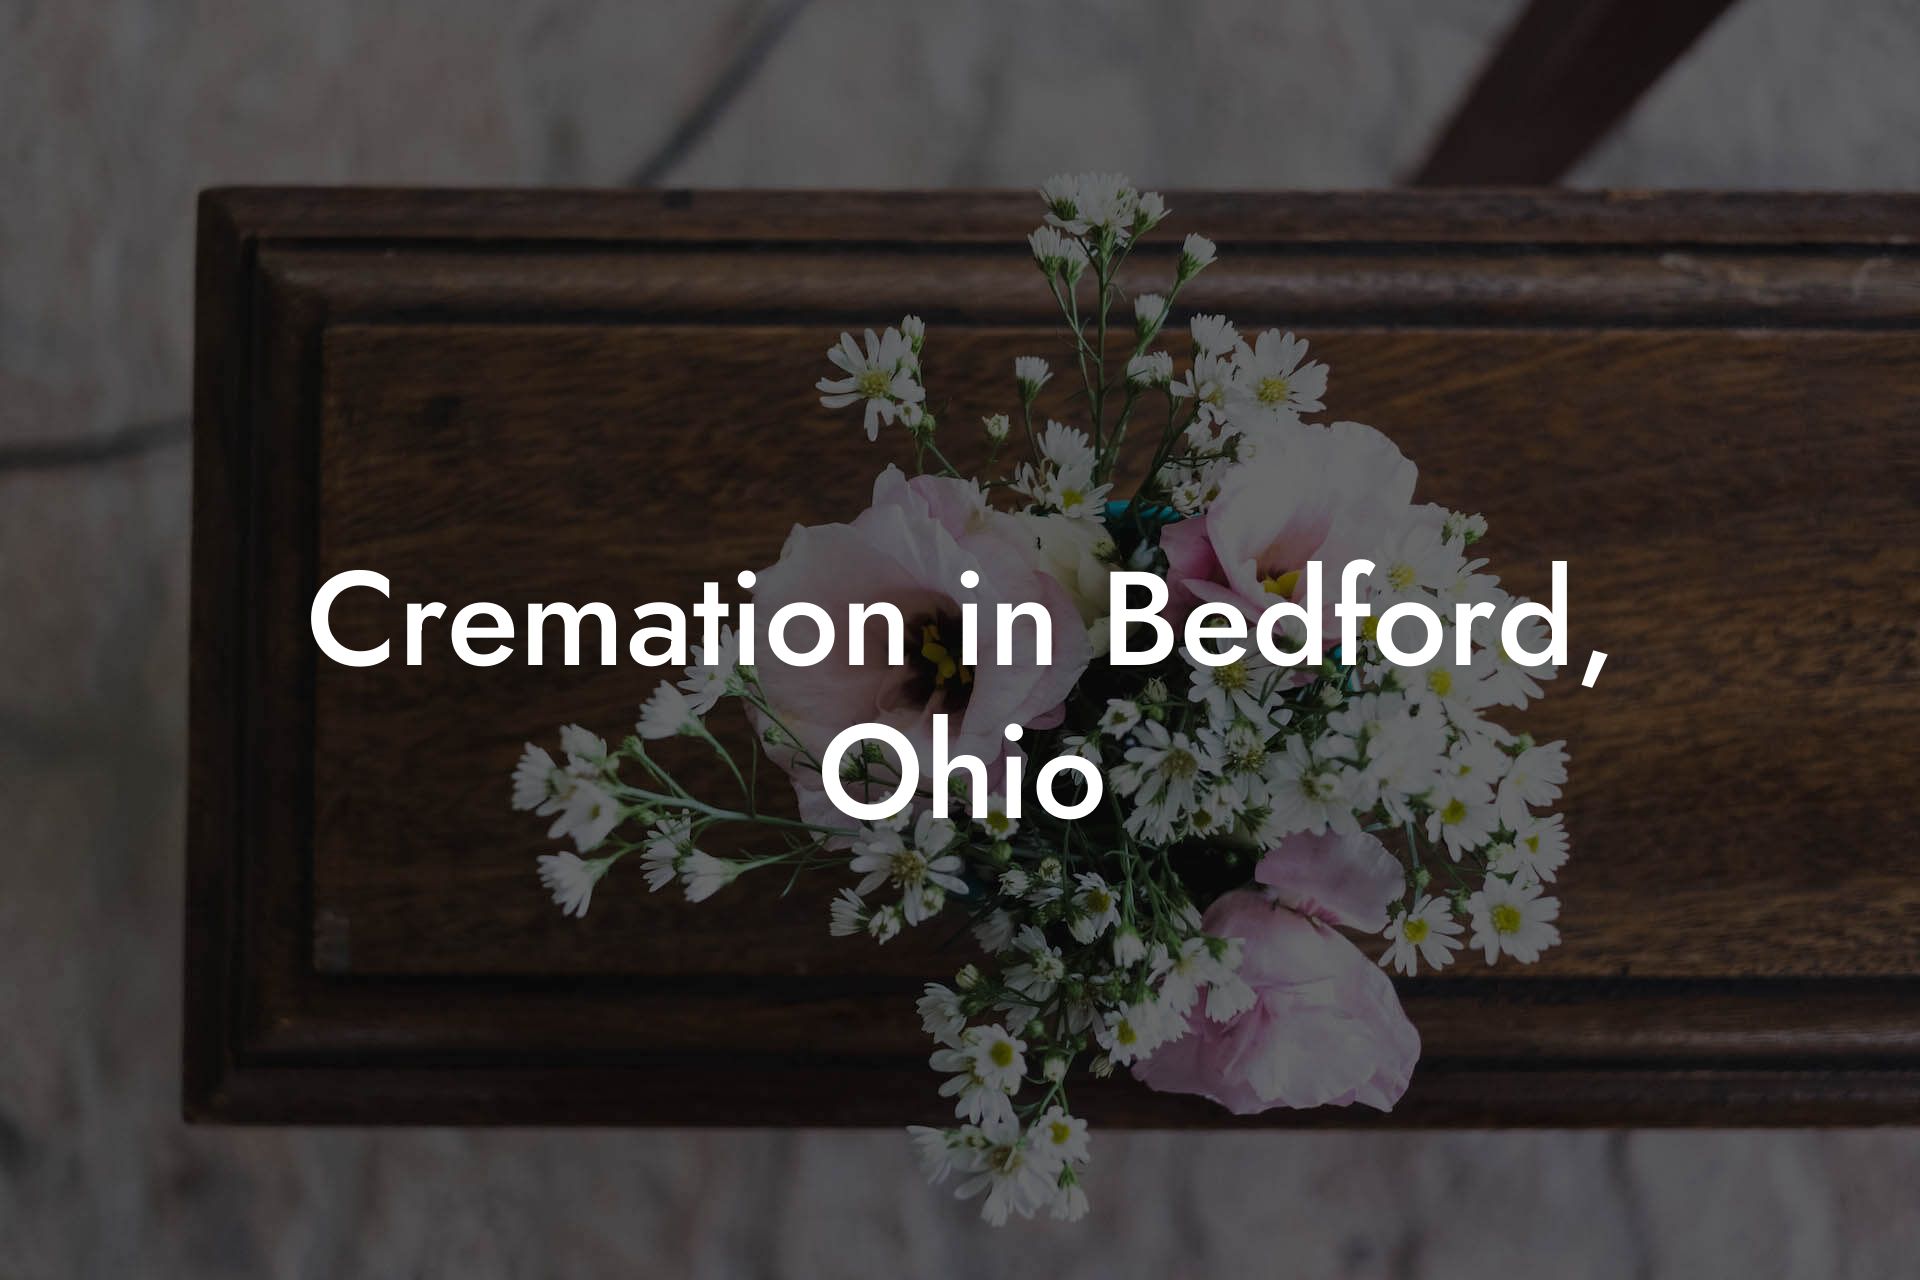 Cremation in Bedford, Ohio